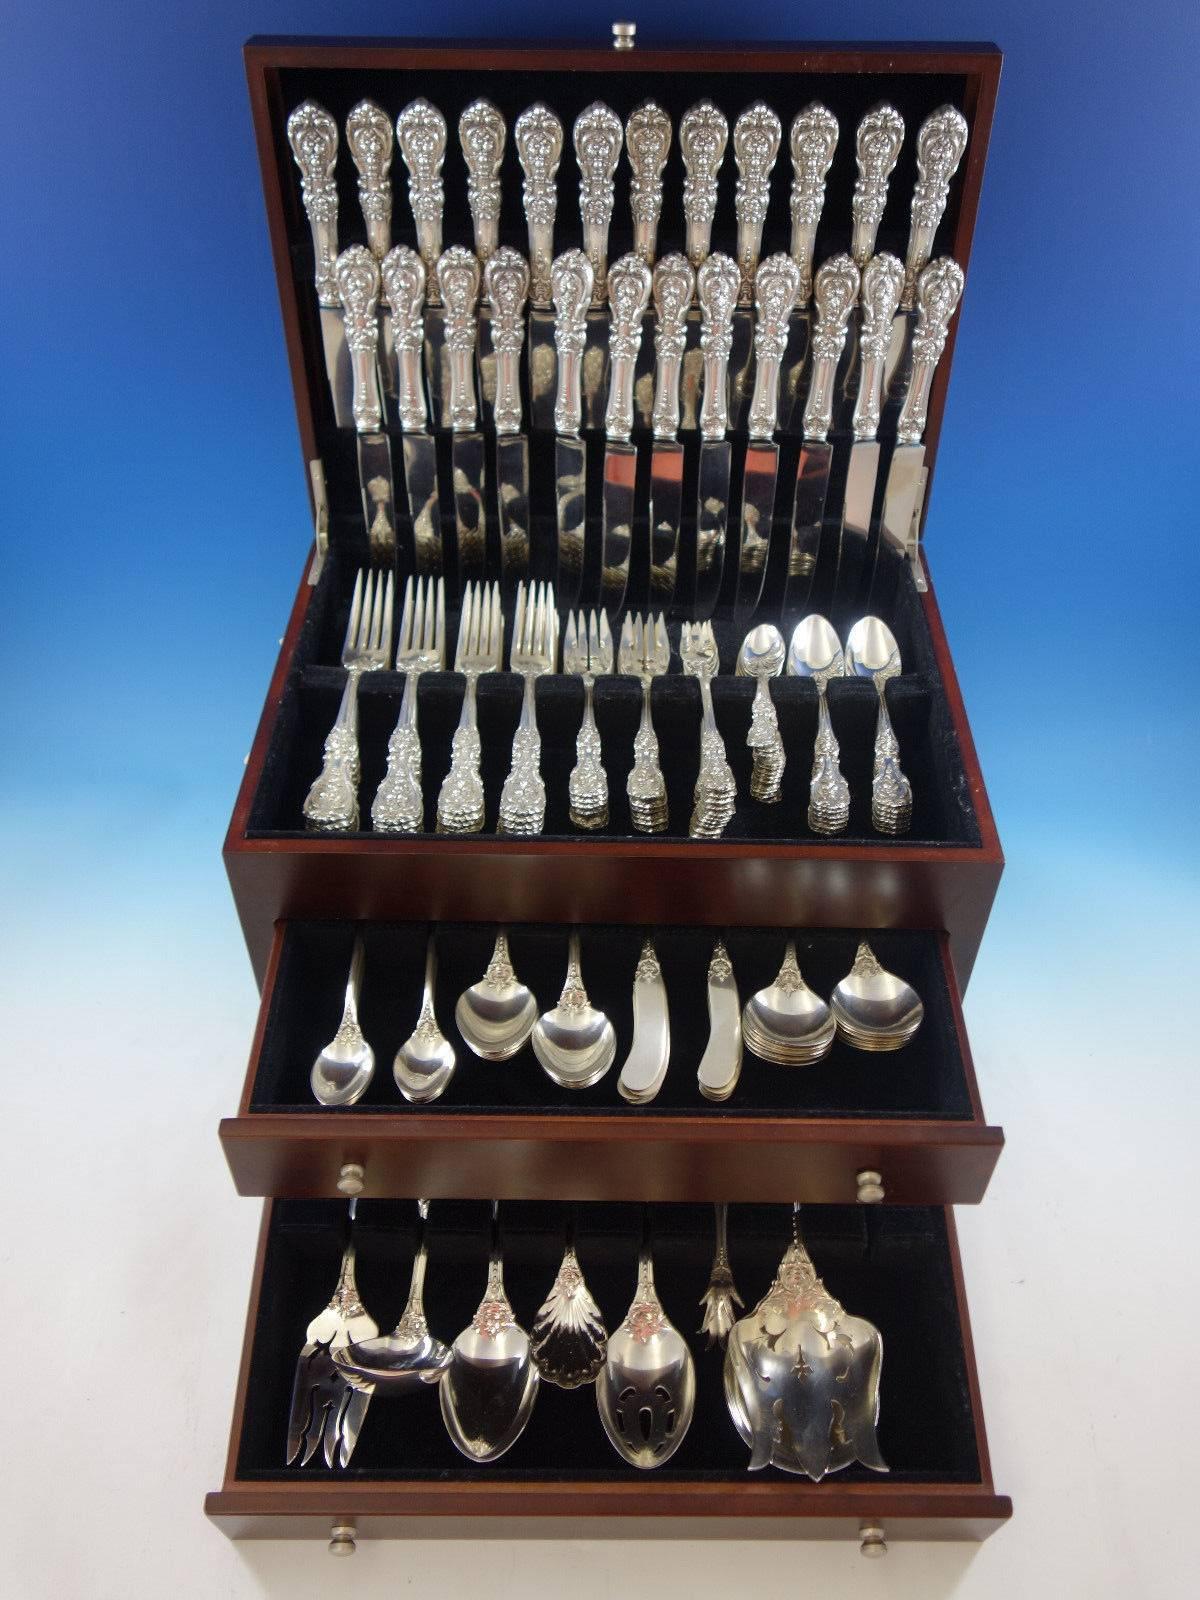 Notefrancis I by Reed and Barton old sterling silver flatware set, 152 pieces. This set includes: 12 dinner size knives, 9 3/4